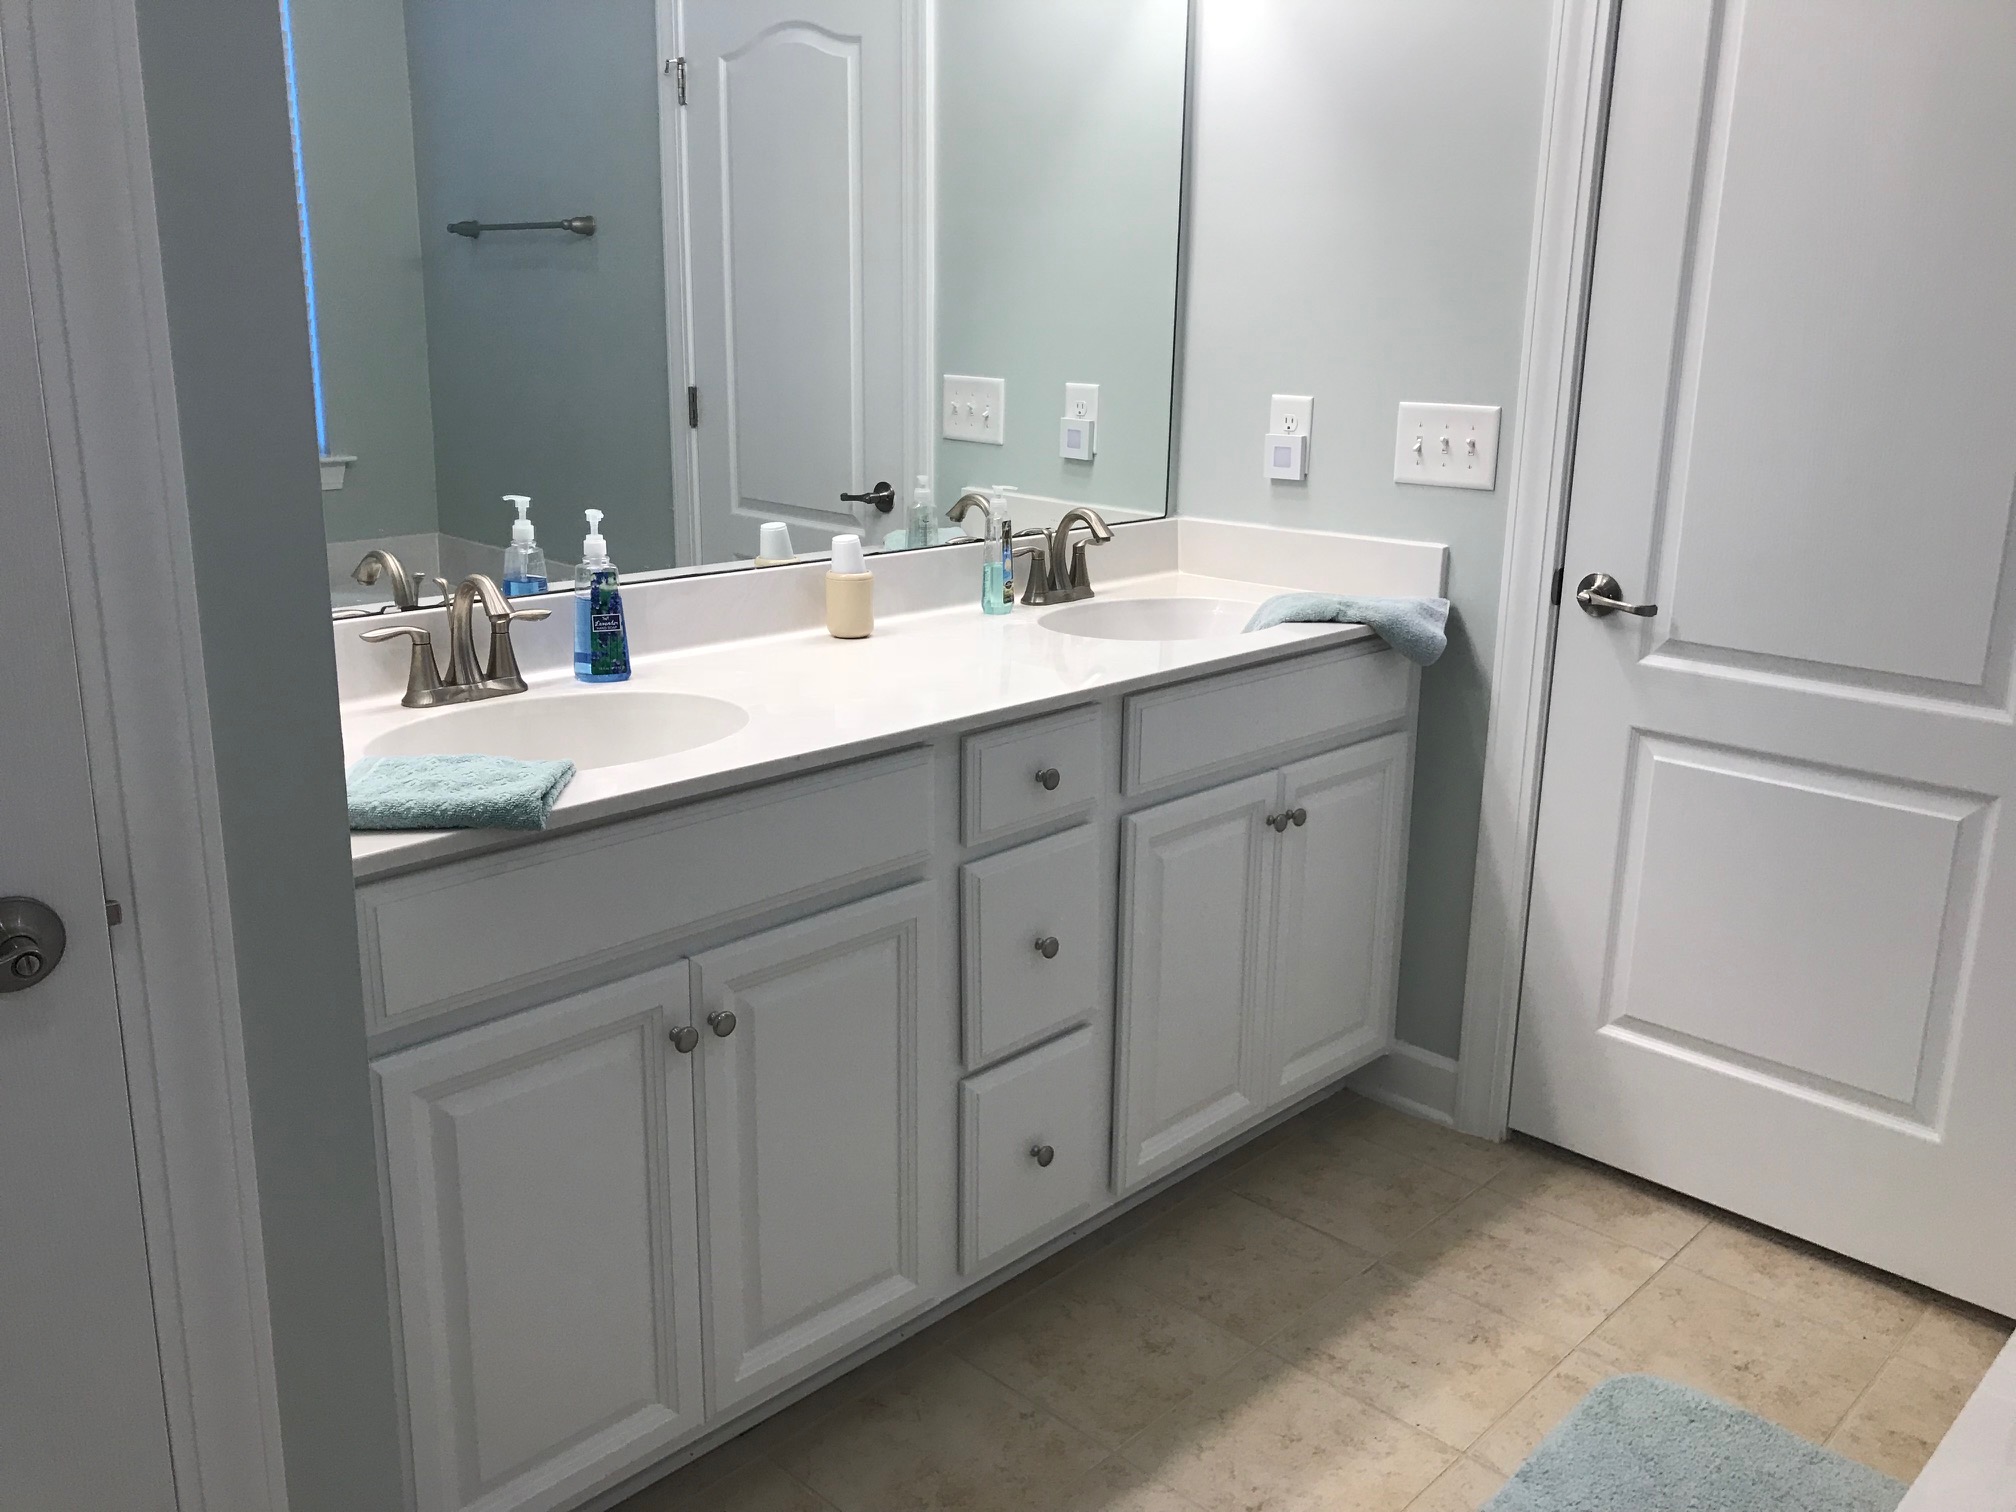 Myrtle Beach bathroom painting after